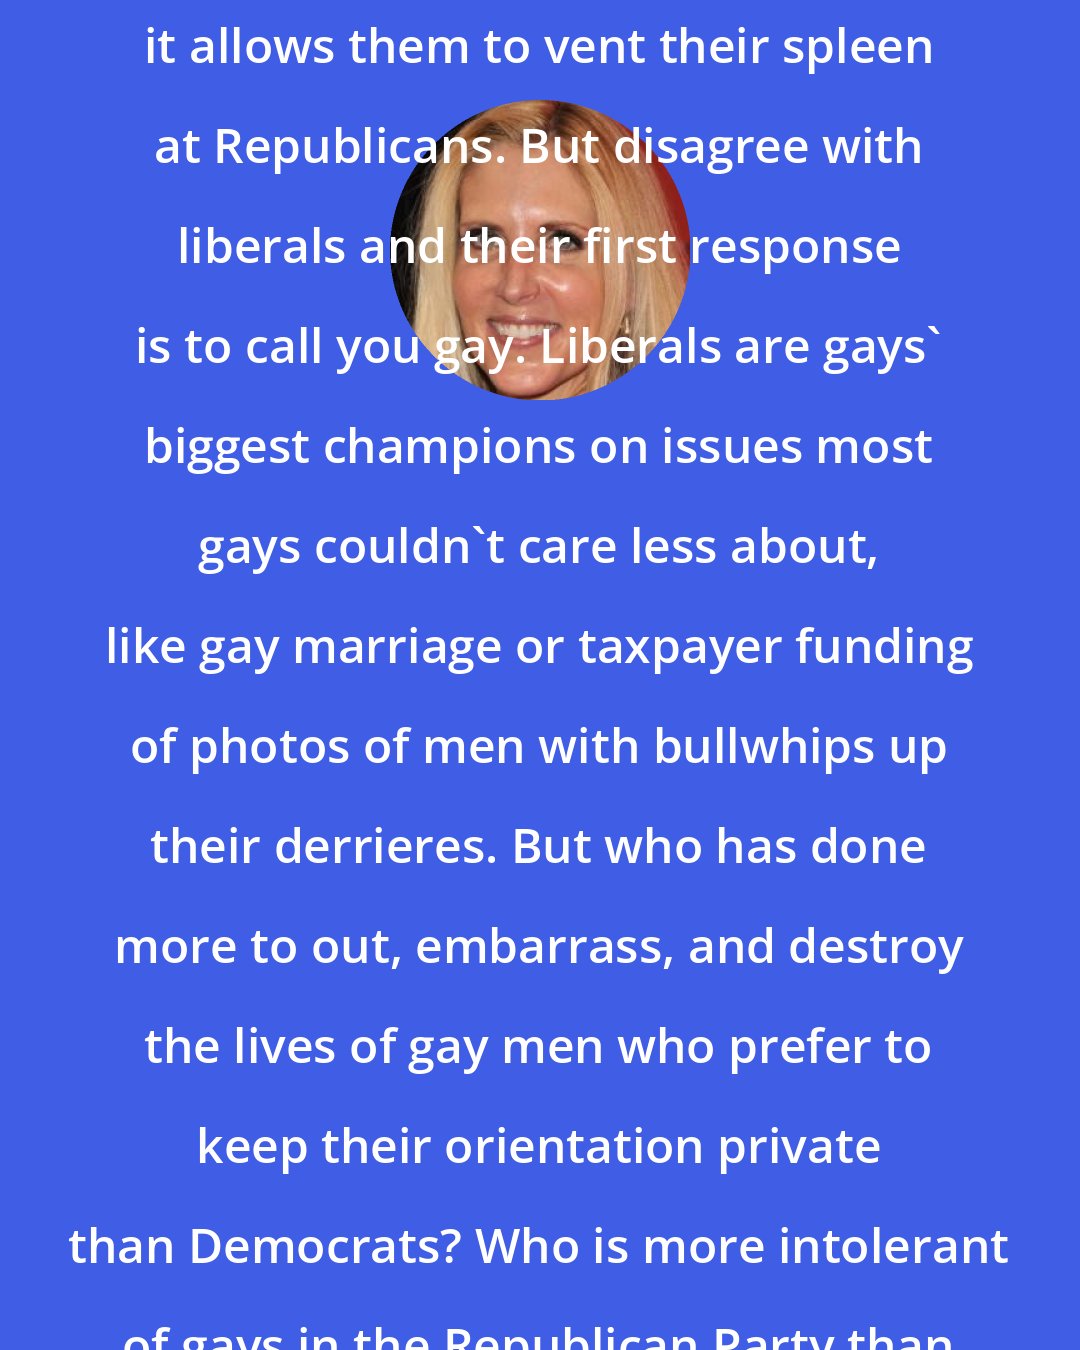 Ann Coulter: Liberals claim to love gays when it allows them to vent their spleen at Republicans. But disagree with liberals and their first response is to call you gay. Liberals are gays' biggest champions on issues most gays couldn't care less about, like gay marriage or taxpayer funding of photos of men with bullwhips up their derrieres. But who has done more to out, embarrass, and destroy the lives of gay men who prefer to keep their orientation private than Democrats? Who is more intolerant of gays in the Republican Party than gays in the Democratic Party?